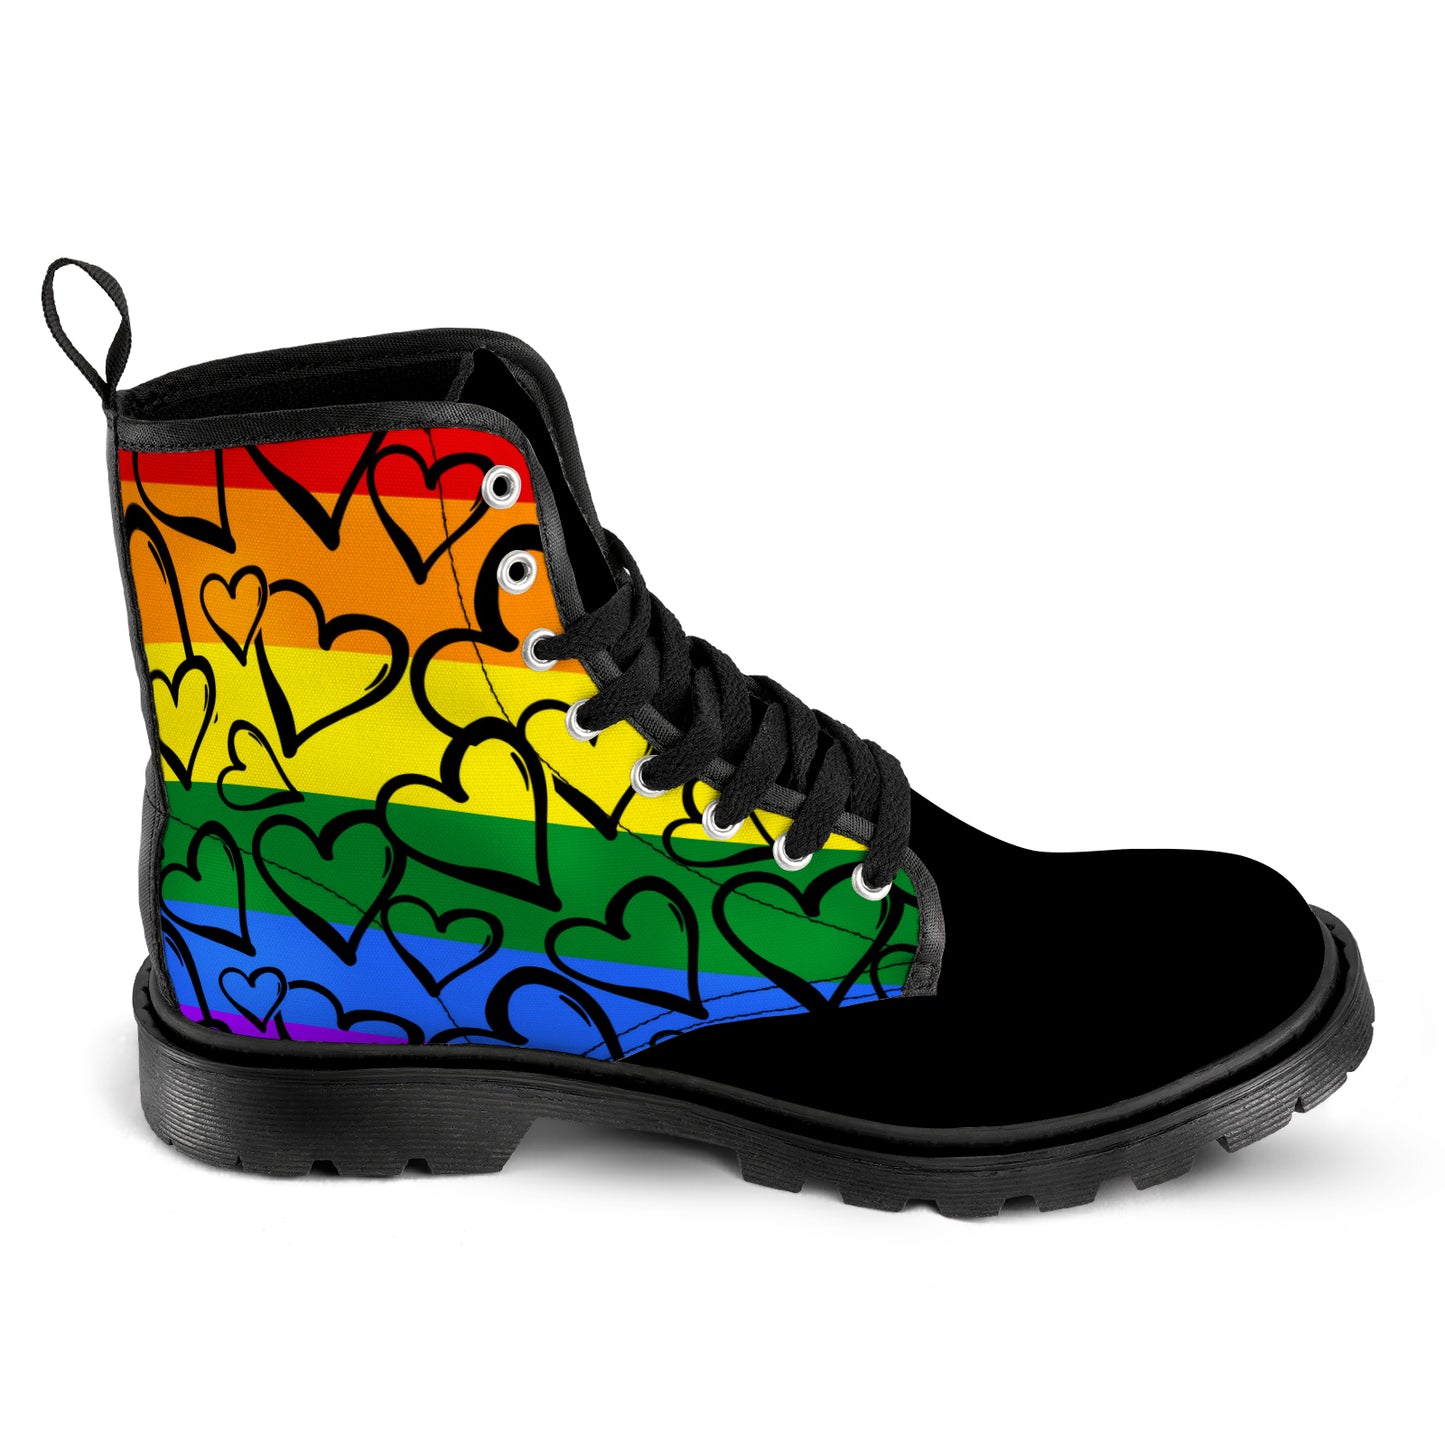 Men's Lace Up Boots - Rainbow Hearts